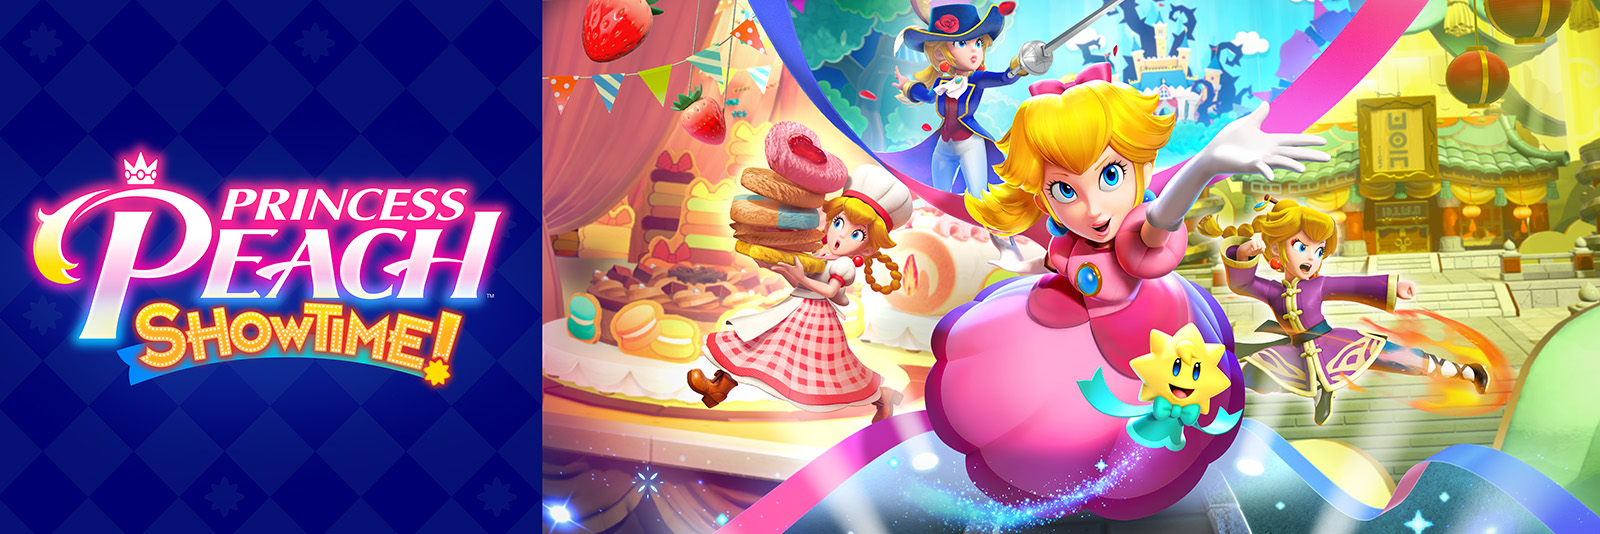 Princess Peach: Showtime! banner image, with Mario and Luigi running over a colorful background, and the game logo on the left